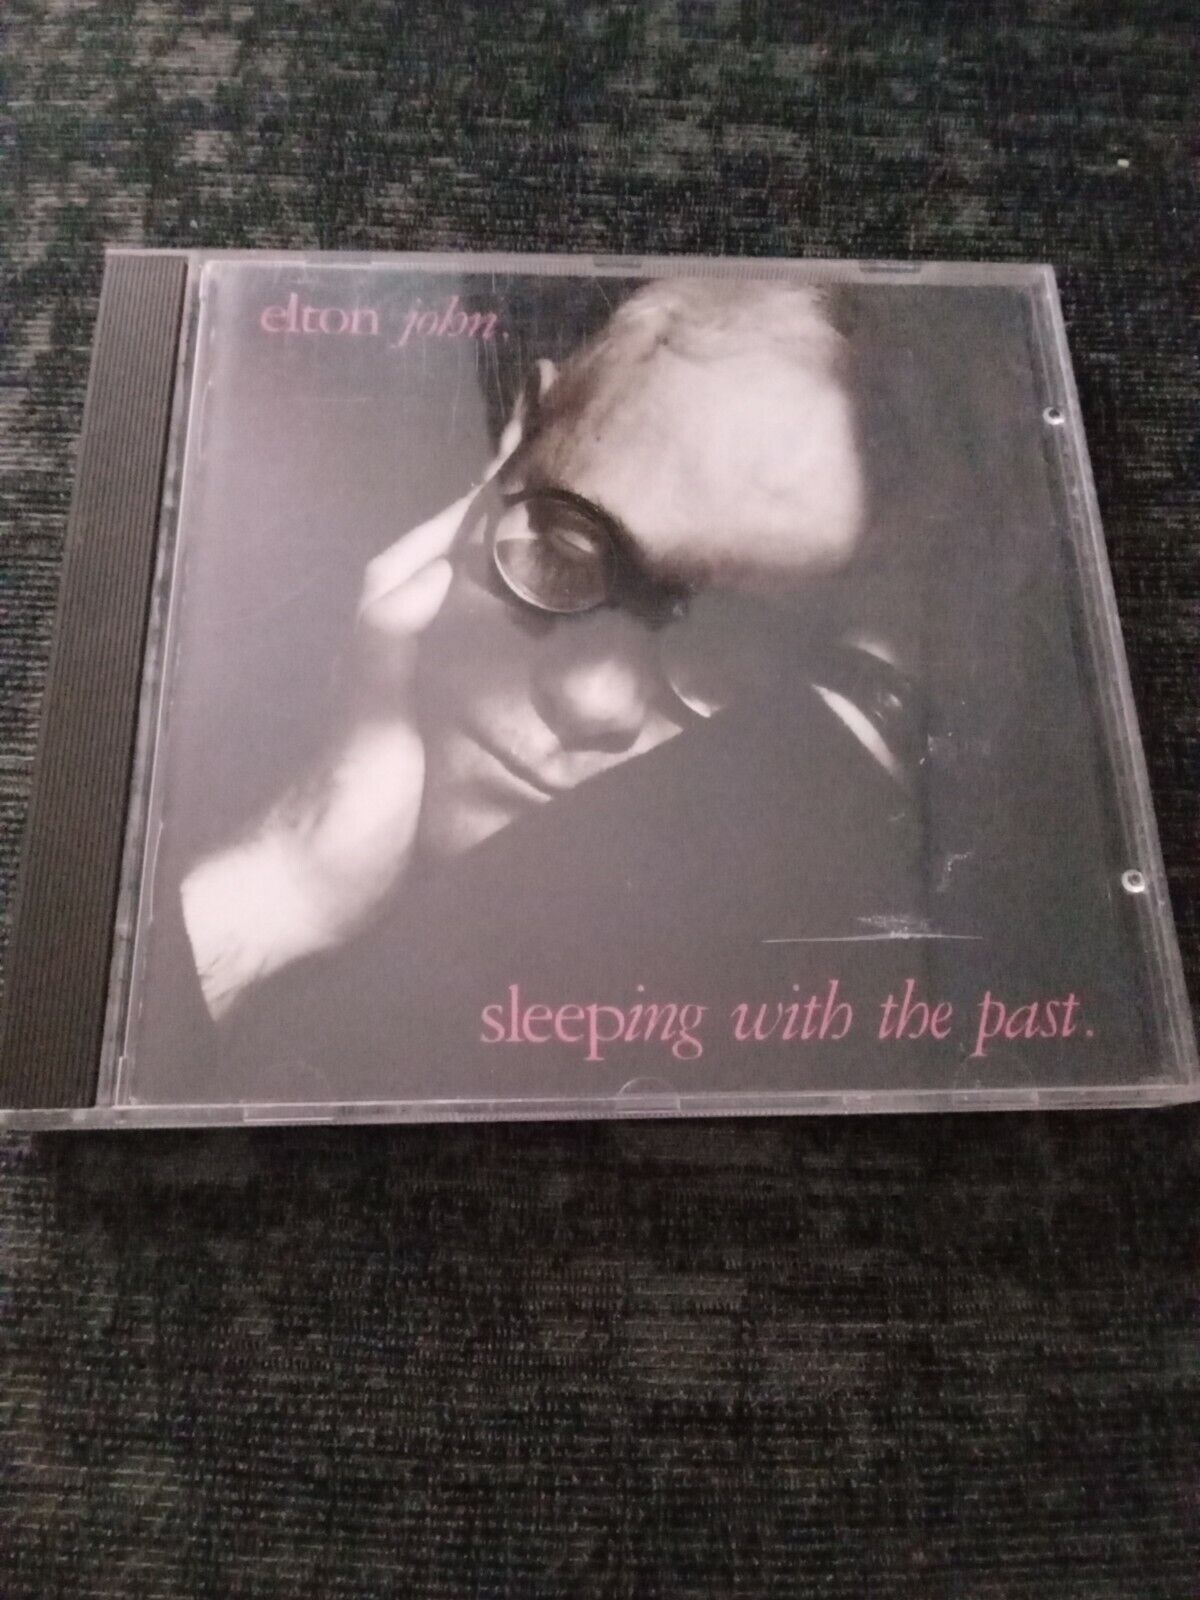 Primary image for Sleeping with the Past by Elton John (CD, 1989)